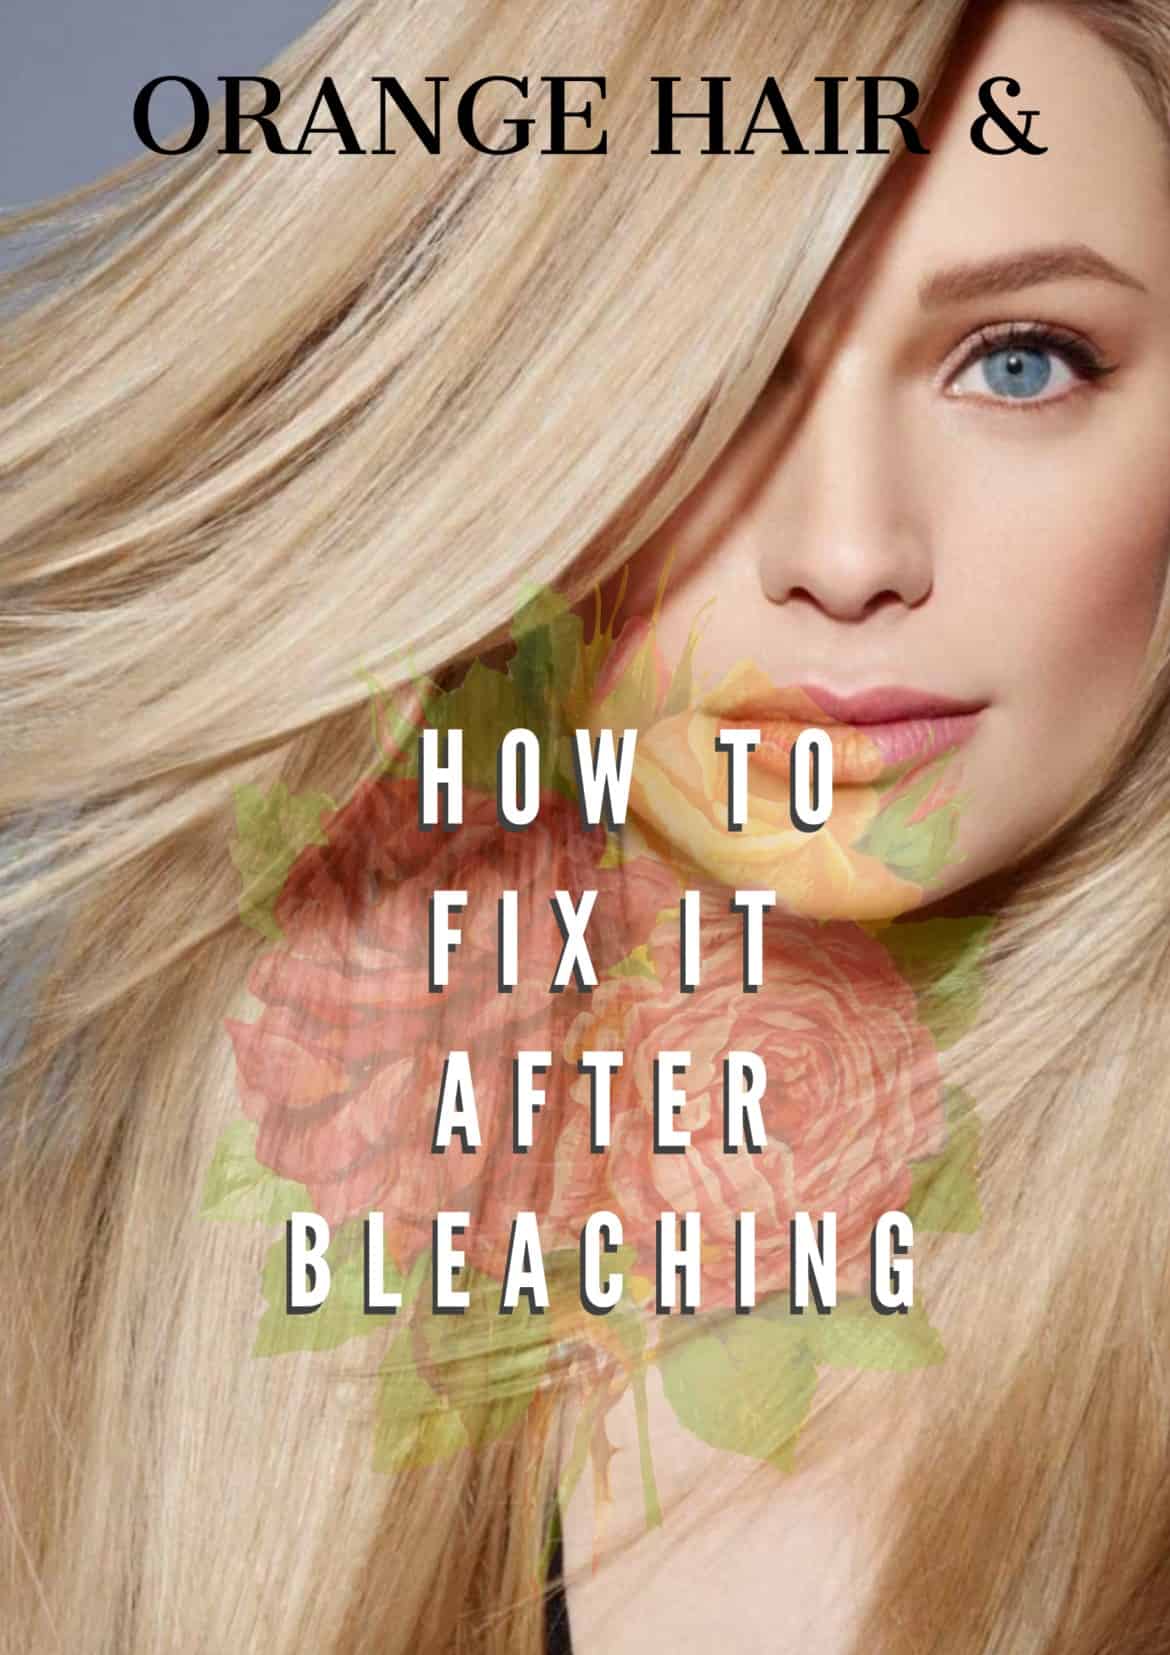 Orange Hair & How To Fix It After Bleaching: Our Guide To Damage Control